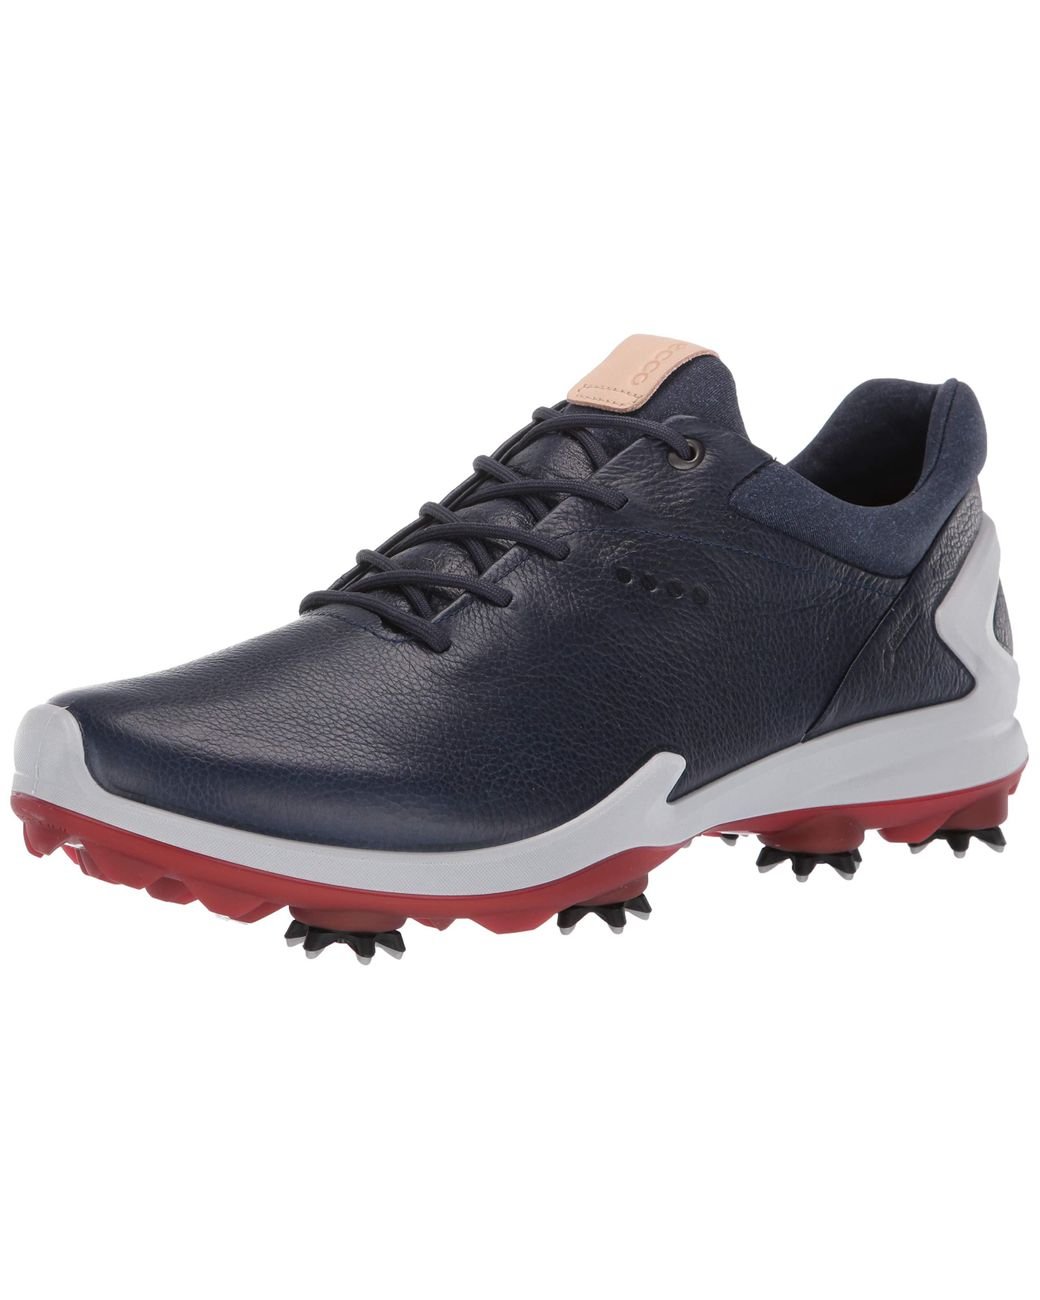 Ecco Leather Biom G3 Golf Shoes in Blue for Men - Lyst